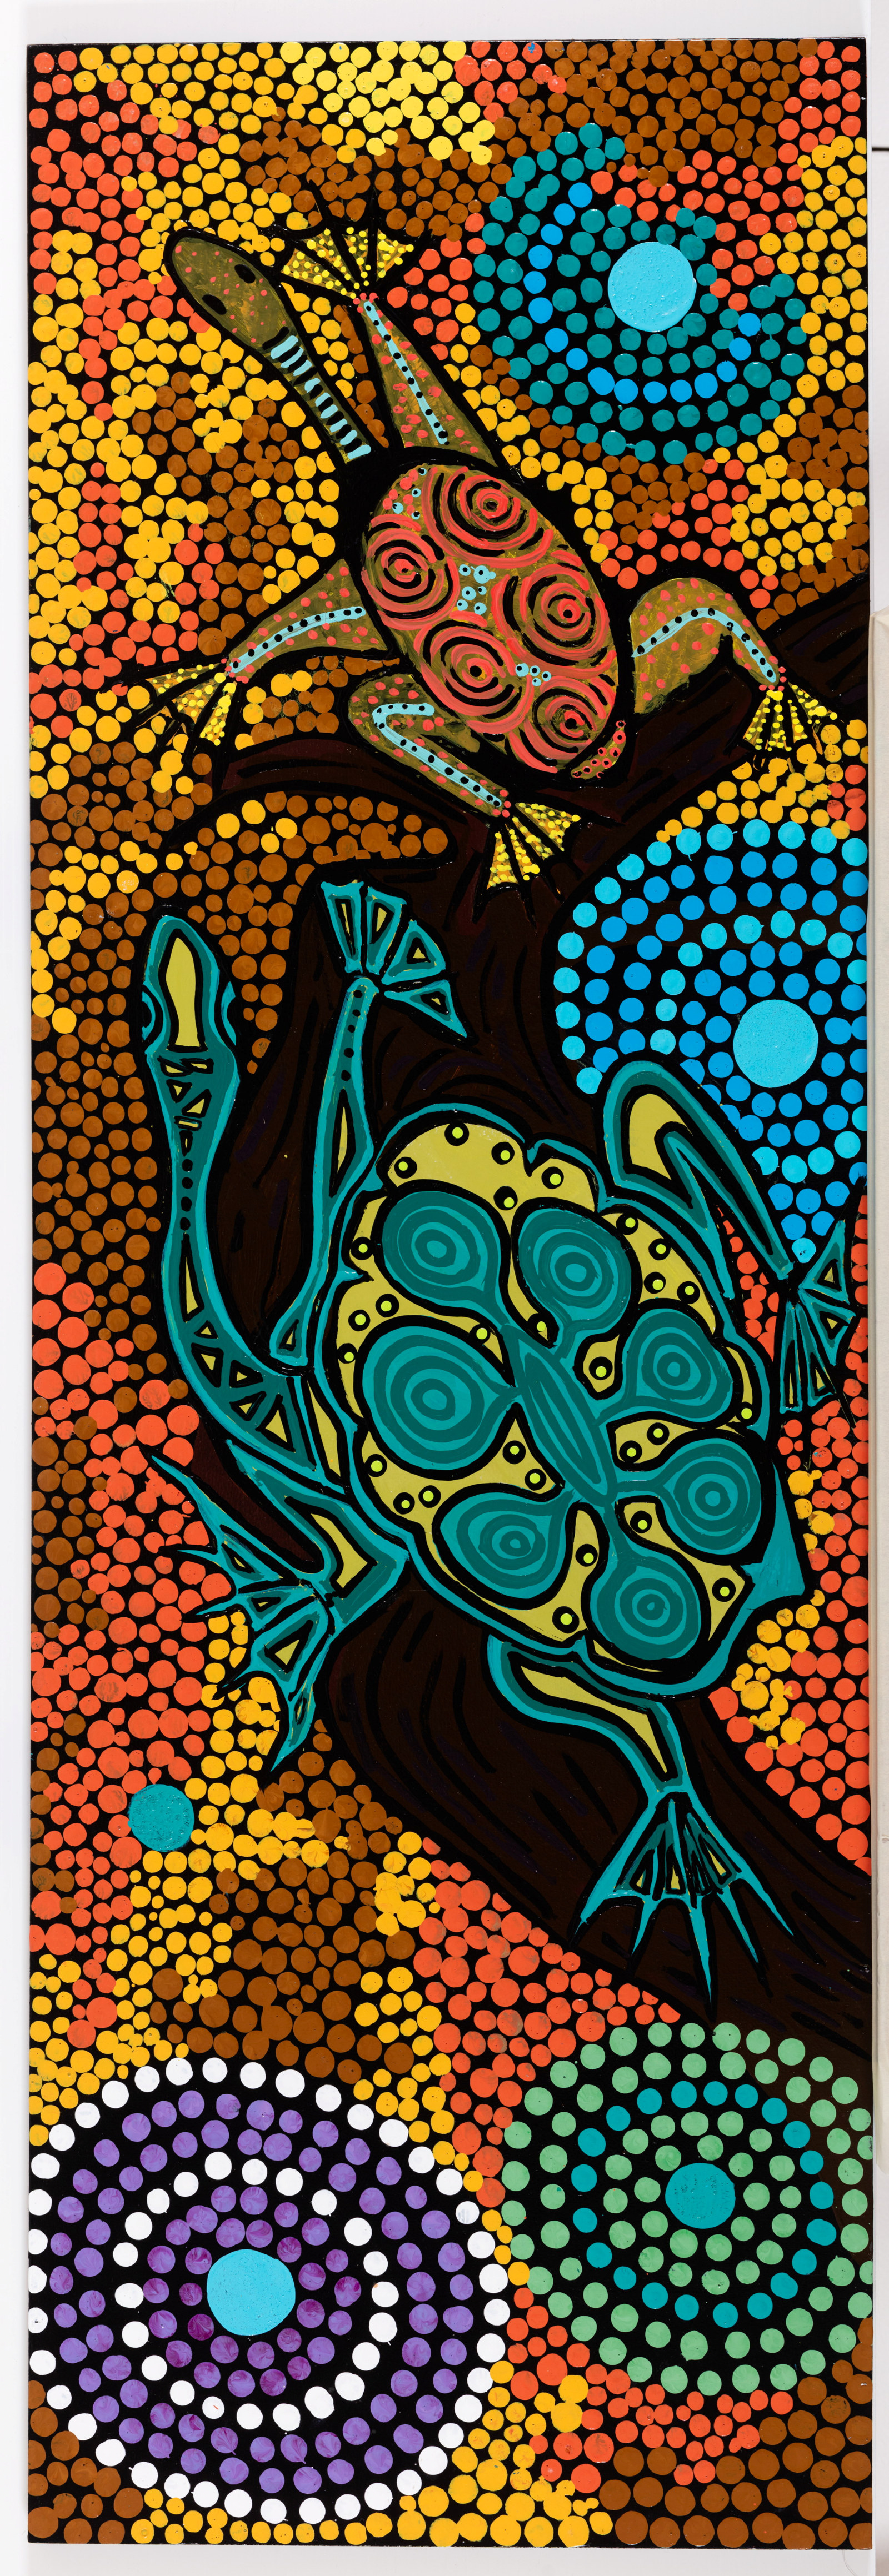 Long-necks, Lorraine Brown and Narelle Thomas, 2022, acrylic on plywood board, 122.5cm x 41cm
The eastern long-necked turtles are and always were a part of Coomaditchie Lagoon. Many re-births have occurred over many years. At times we had to carry the babies back to the Lagoon after they were born in our soil heaps up in our veggie gardens.